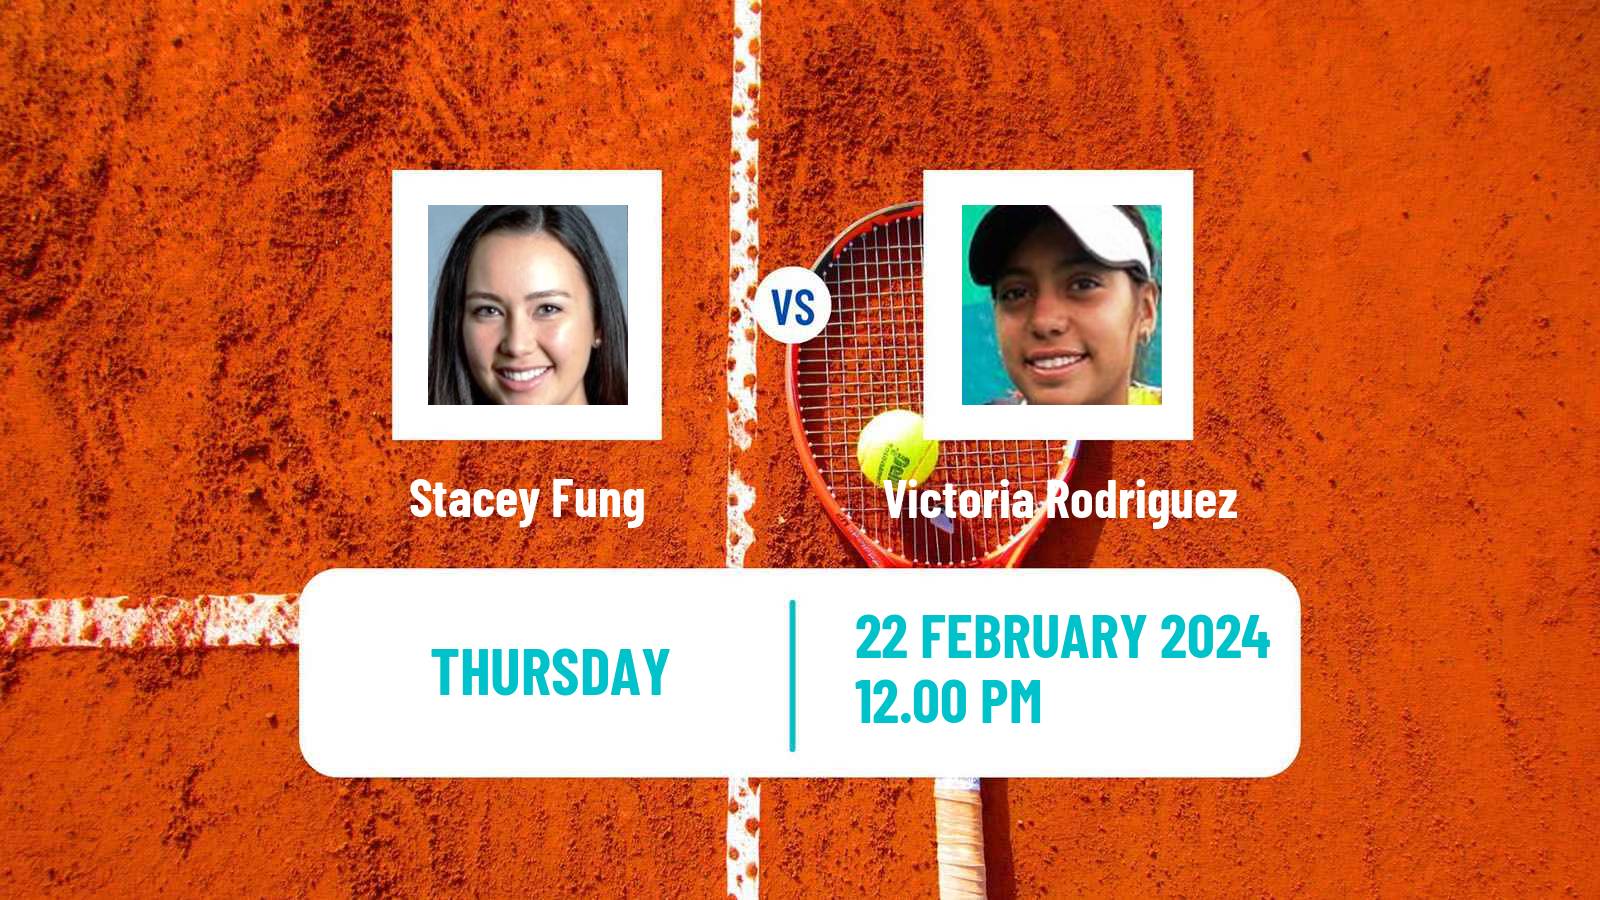 Tennis ITF W50 Mexico City Women Stacey Fung - Victoria Rodriguez